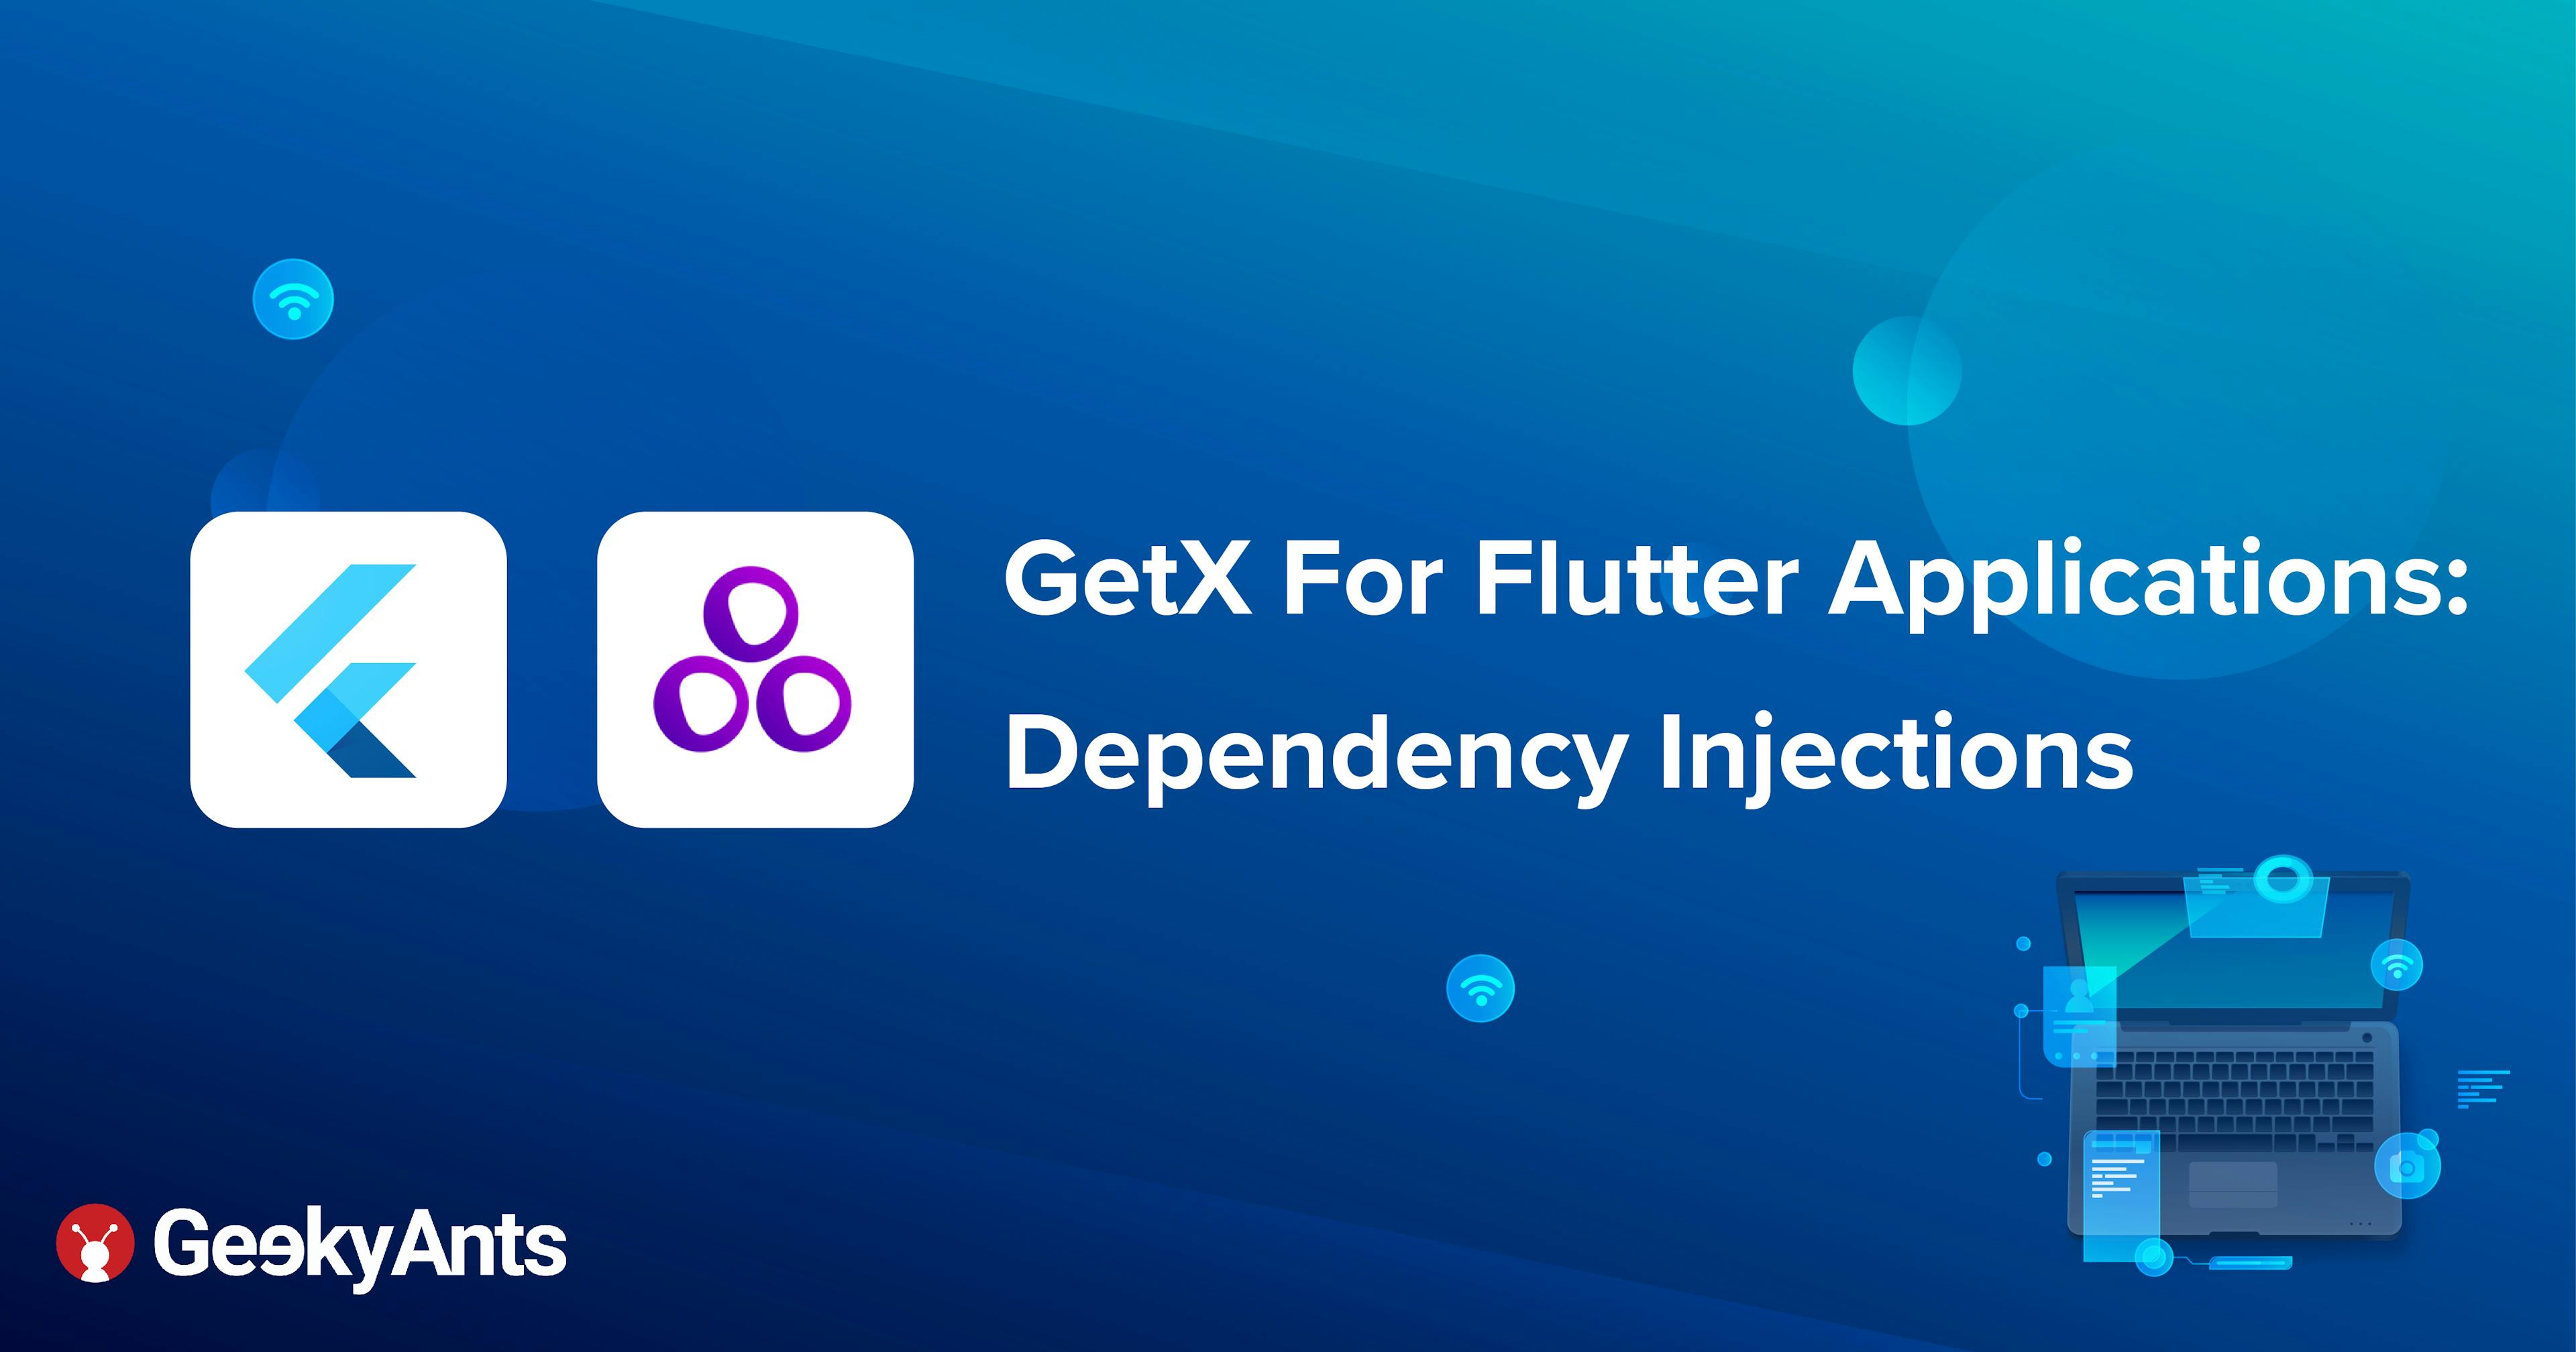 GetX For Flutter Applications: Dependency Injections